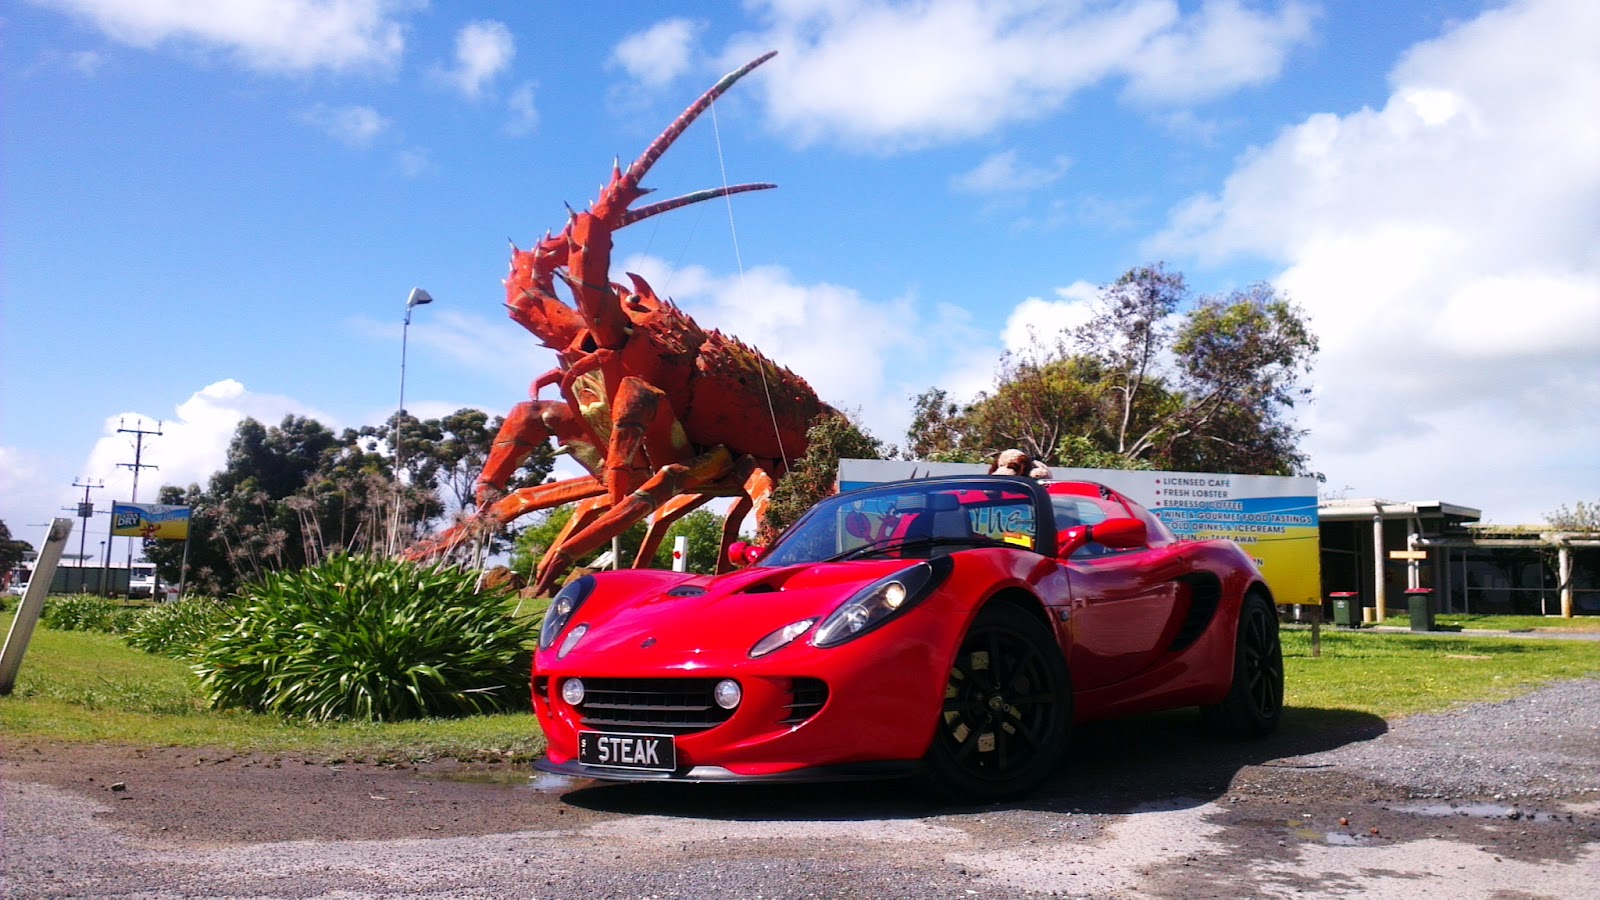 Lotus Elise 111R at the Giant Lobster